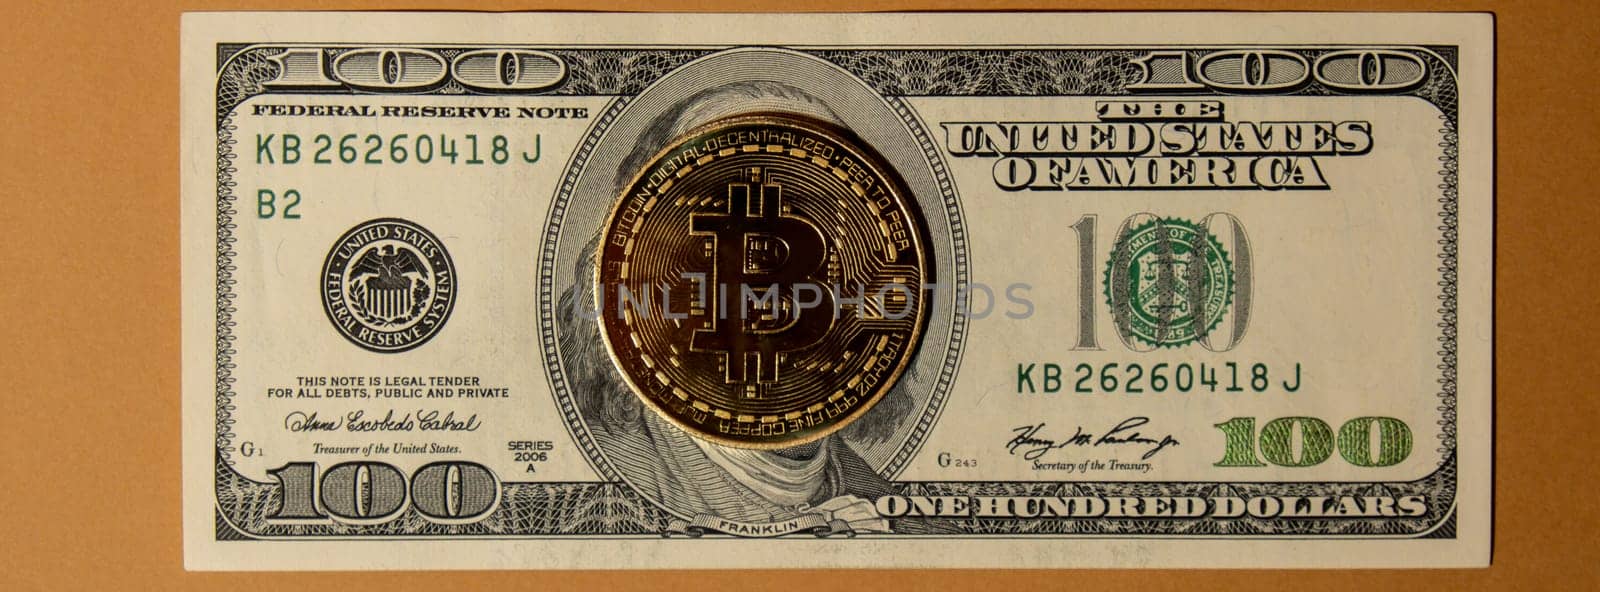 Bitcoin gold coin on bills of 100 dollars American currency. Bitcoin mining trading concept. BTC golden money. Worldwide virtual internet Cryptocurrency or crypto digital payment system. Digital coin money farm in digital cyberspace